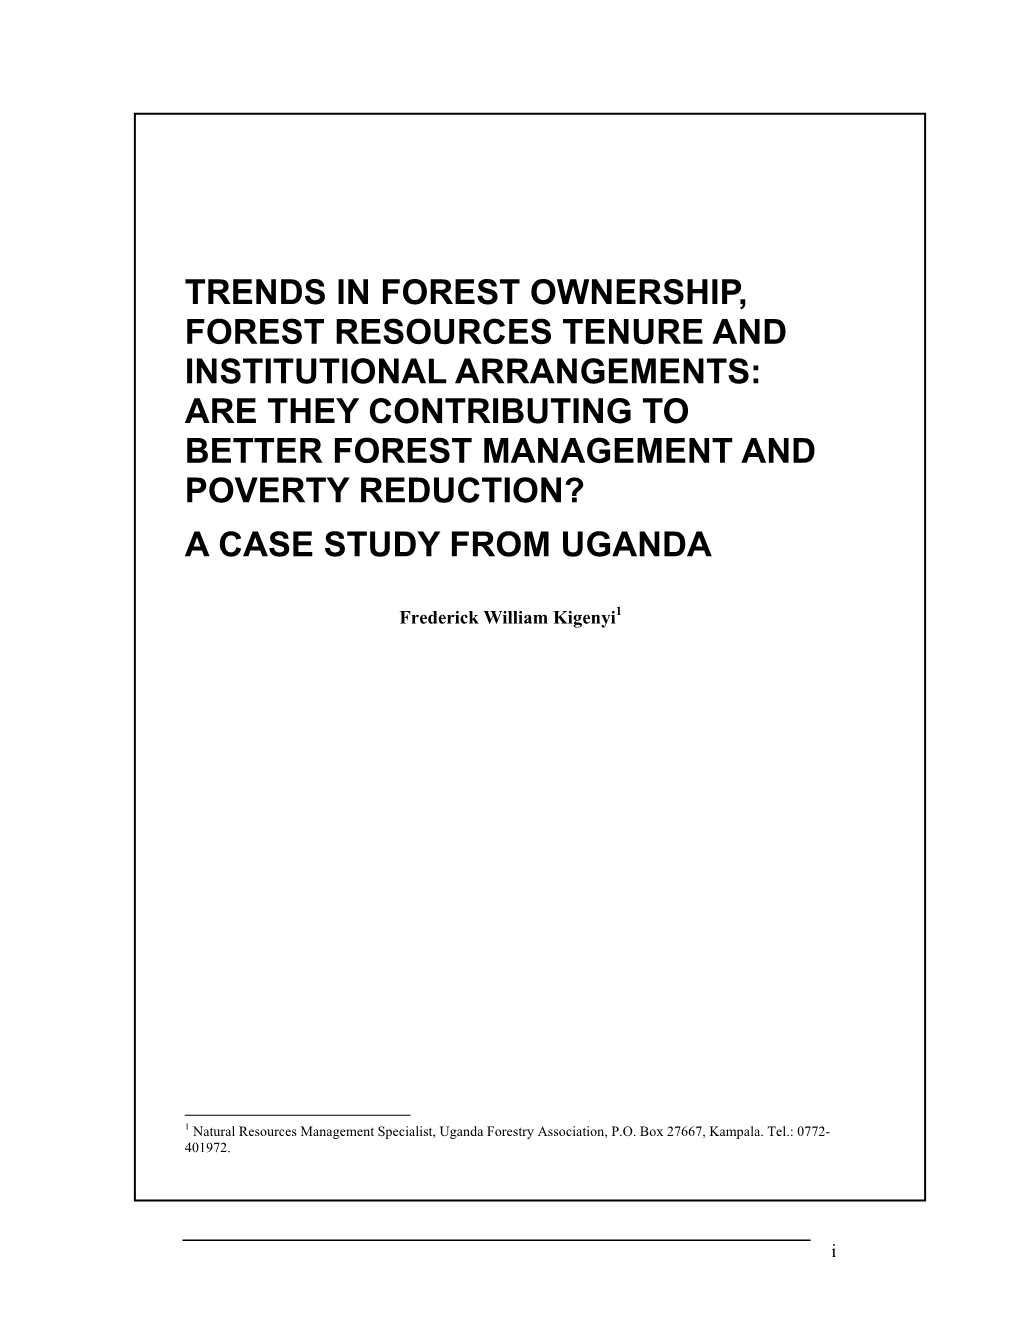 Trends in Forest Ownership, Forest Resources Tenure and Institutional